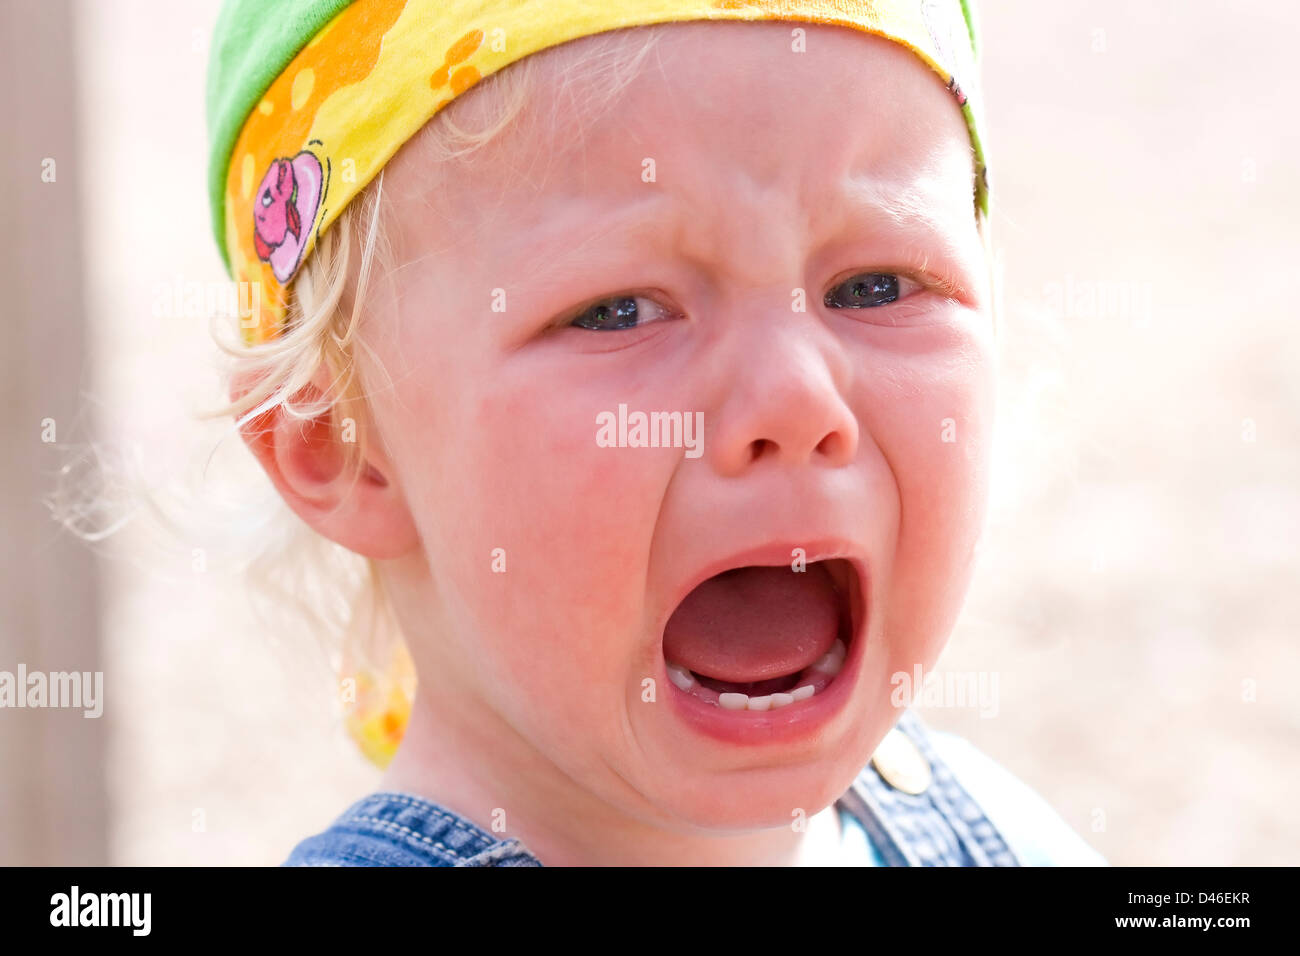 Close-up of a blond baby girl bawling furiously (focus on the left eye and the mouth). Stock Photo